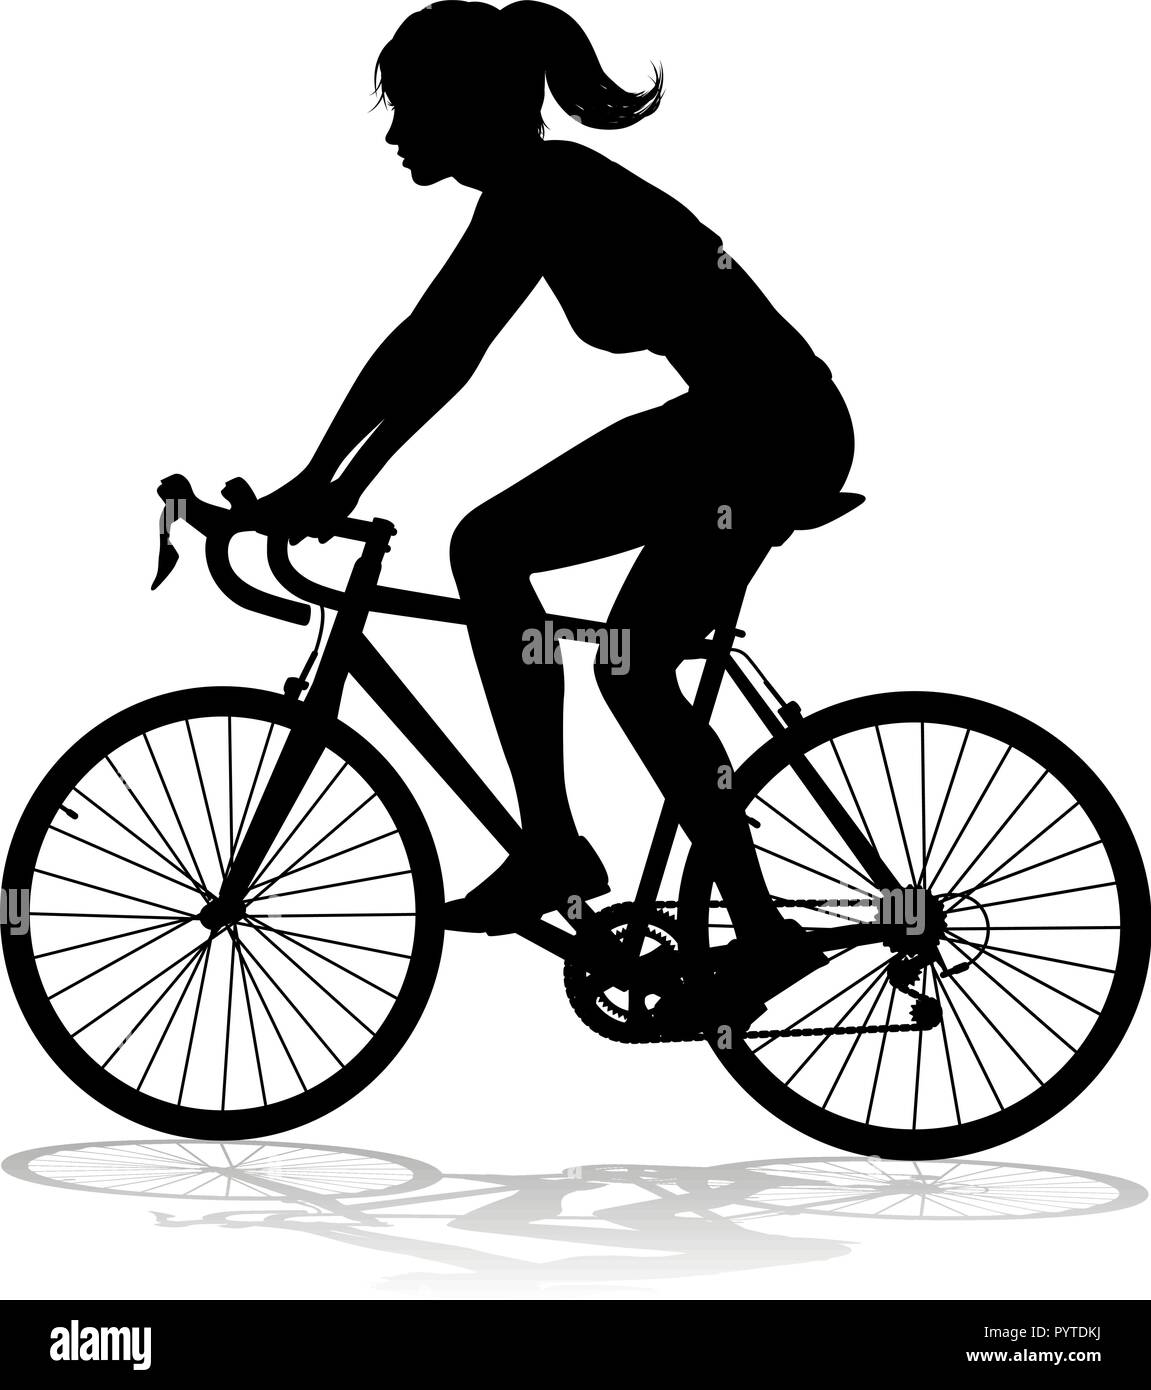 Woman Bike Cyclist Riding Bicycle Silhouette Stock Vector